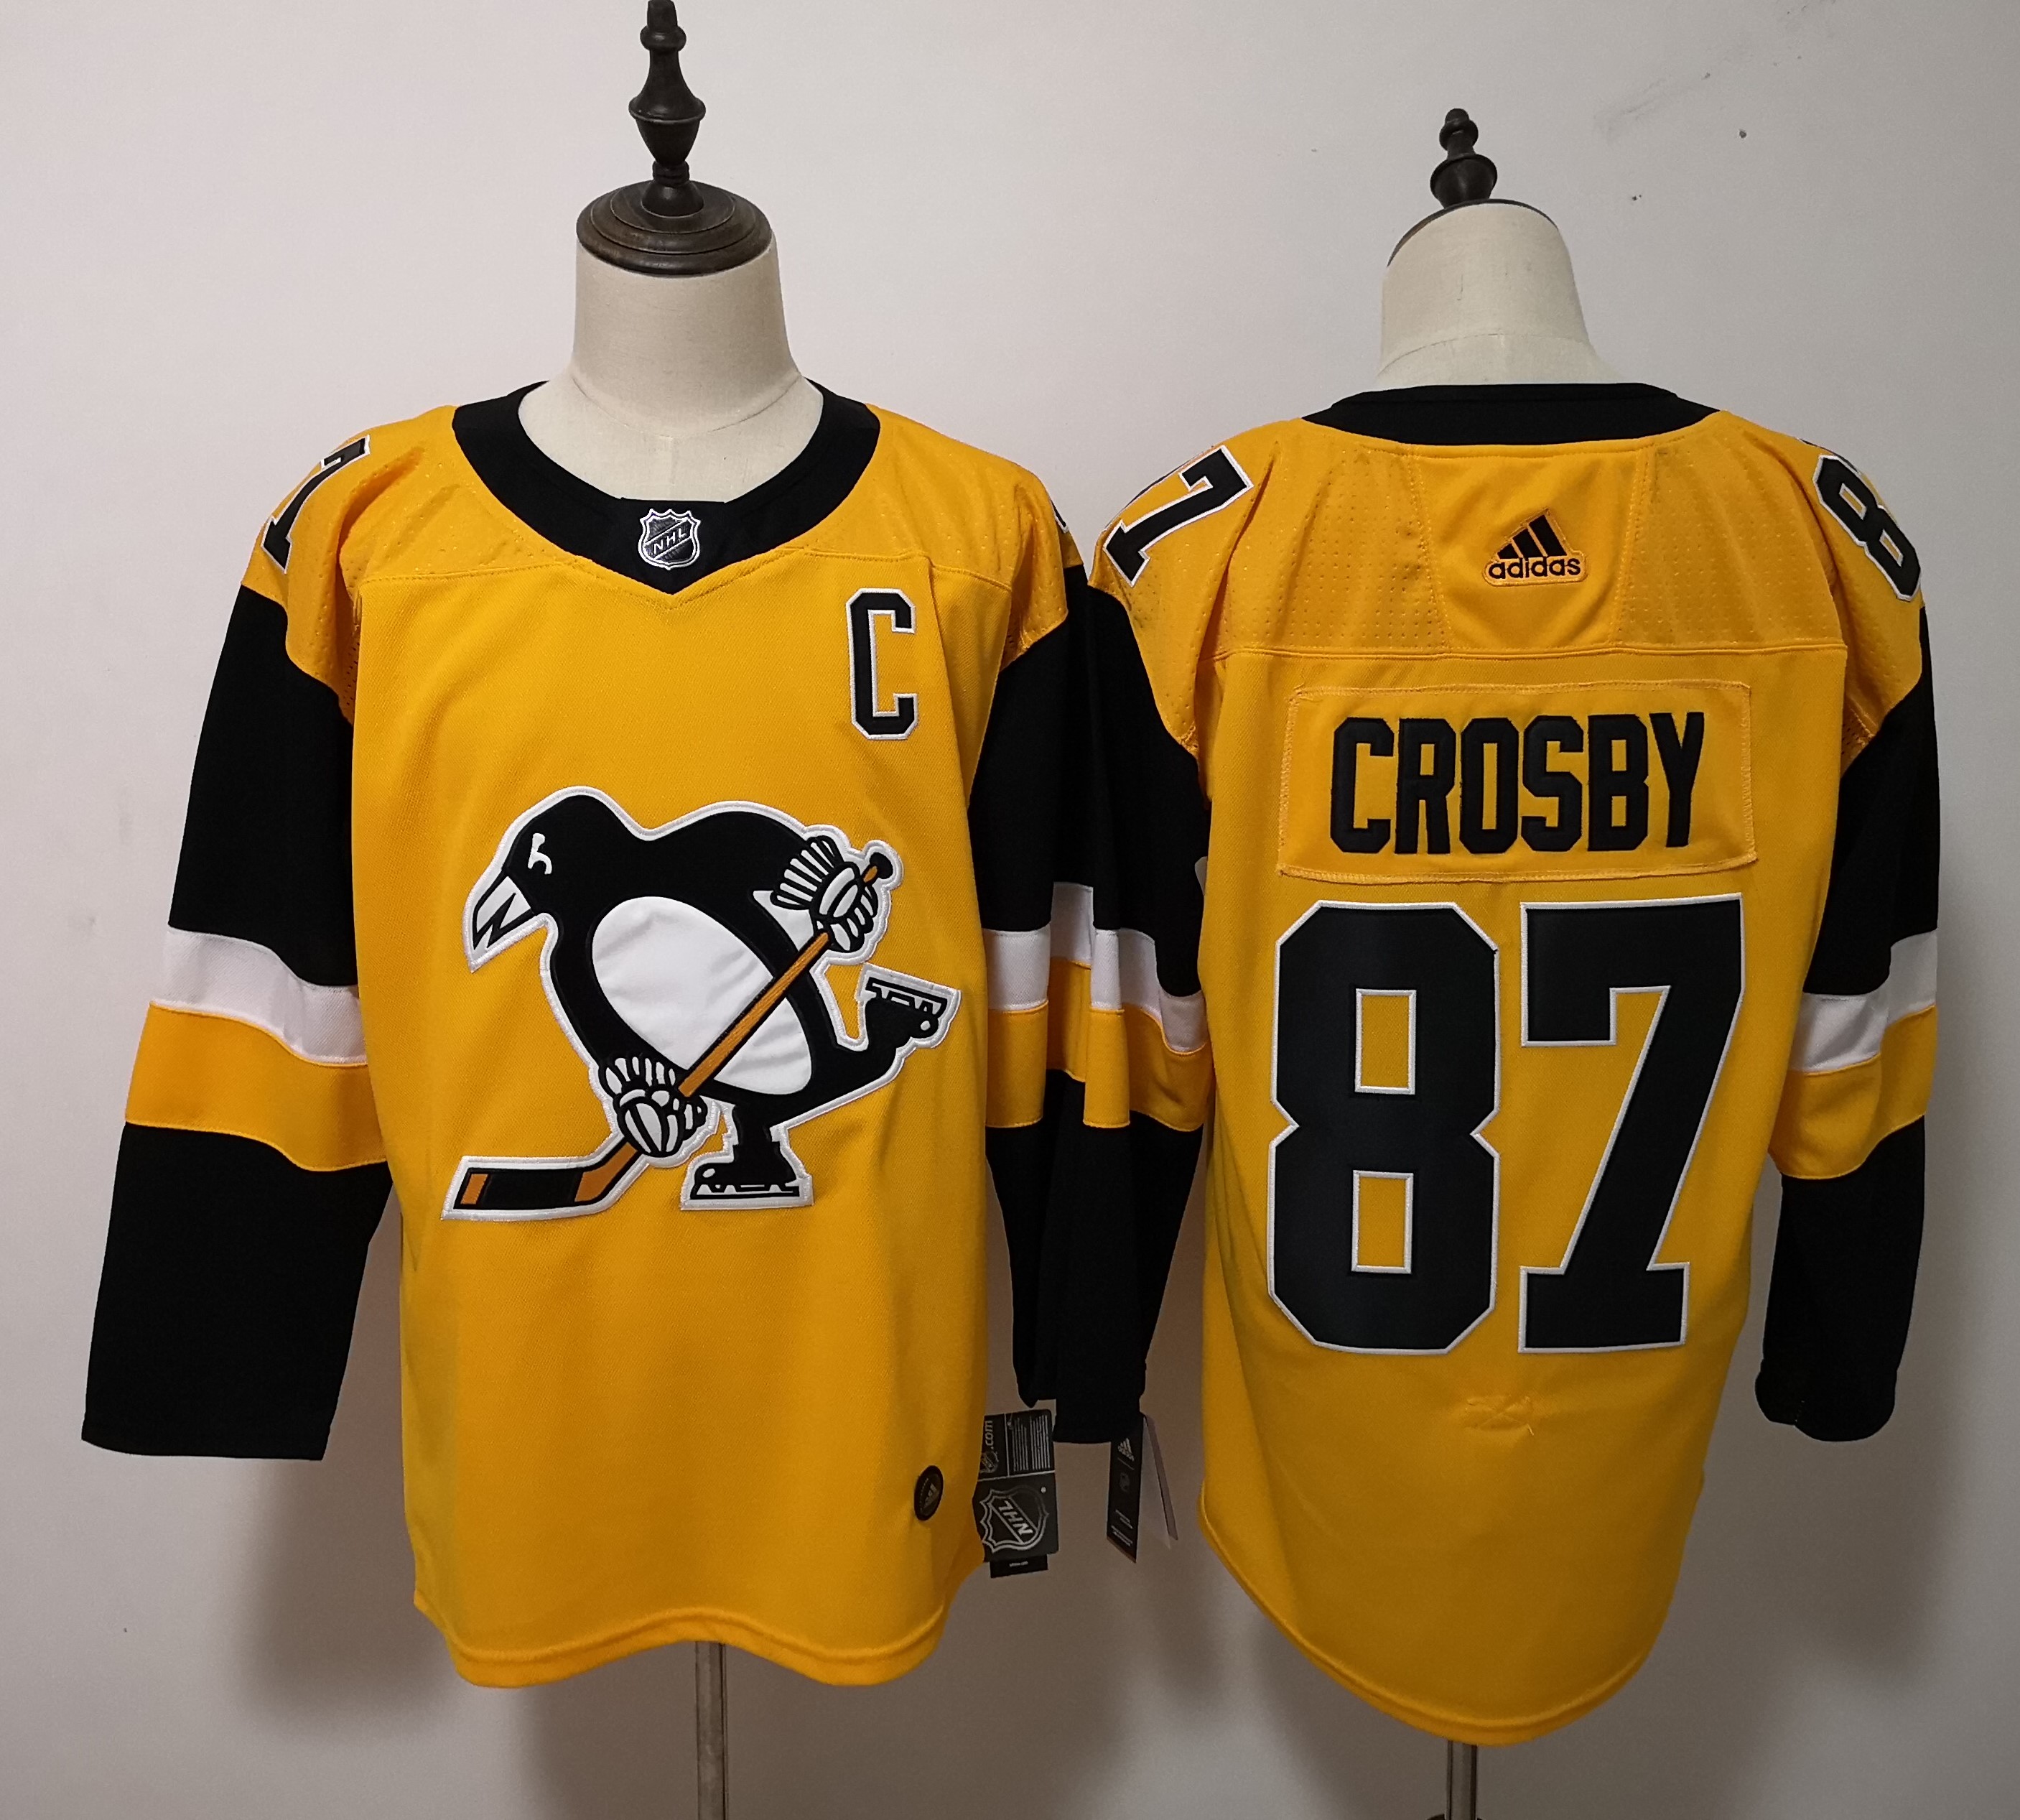 Adidas Penguins #87 Sidney Crosby Yellow Alternate Stitched NHL Jersey